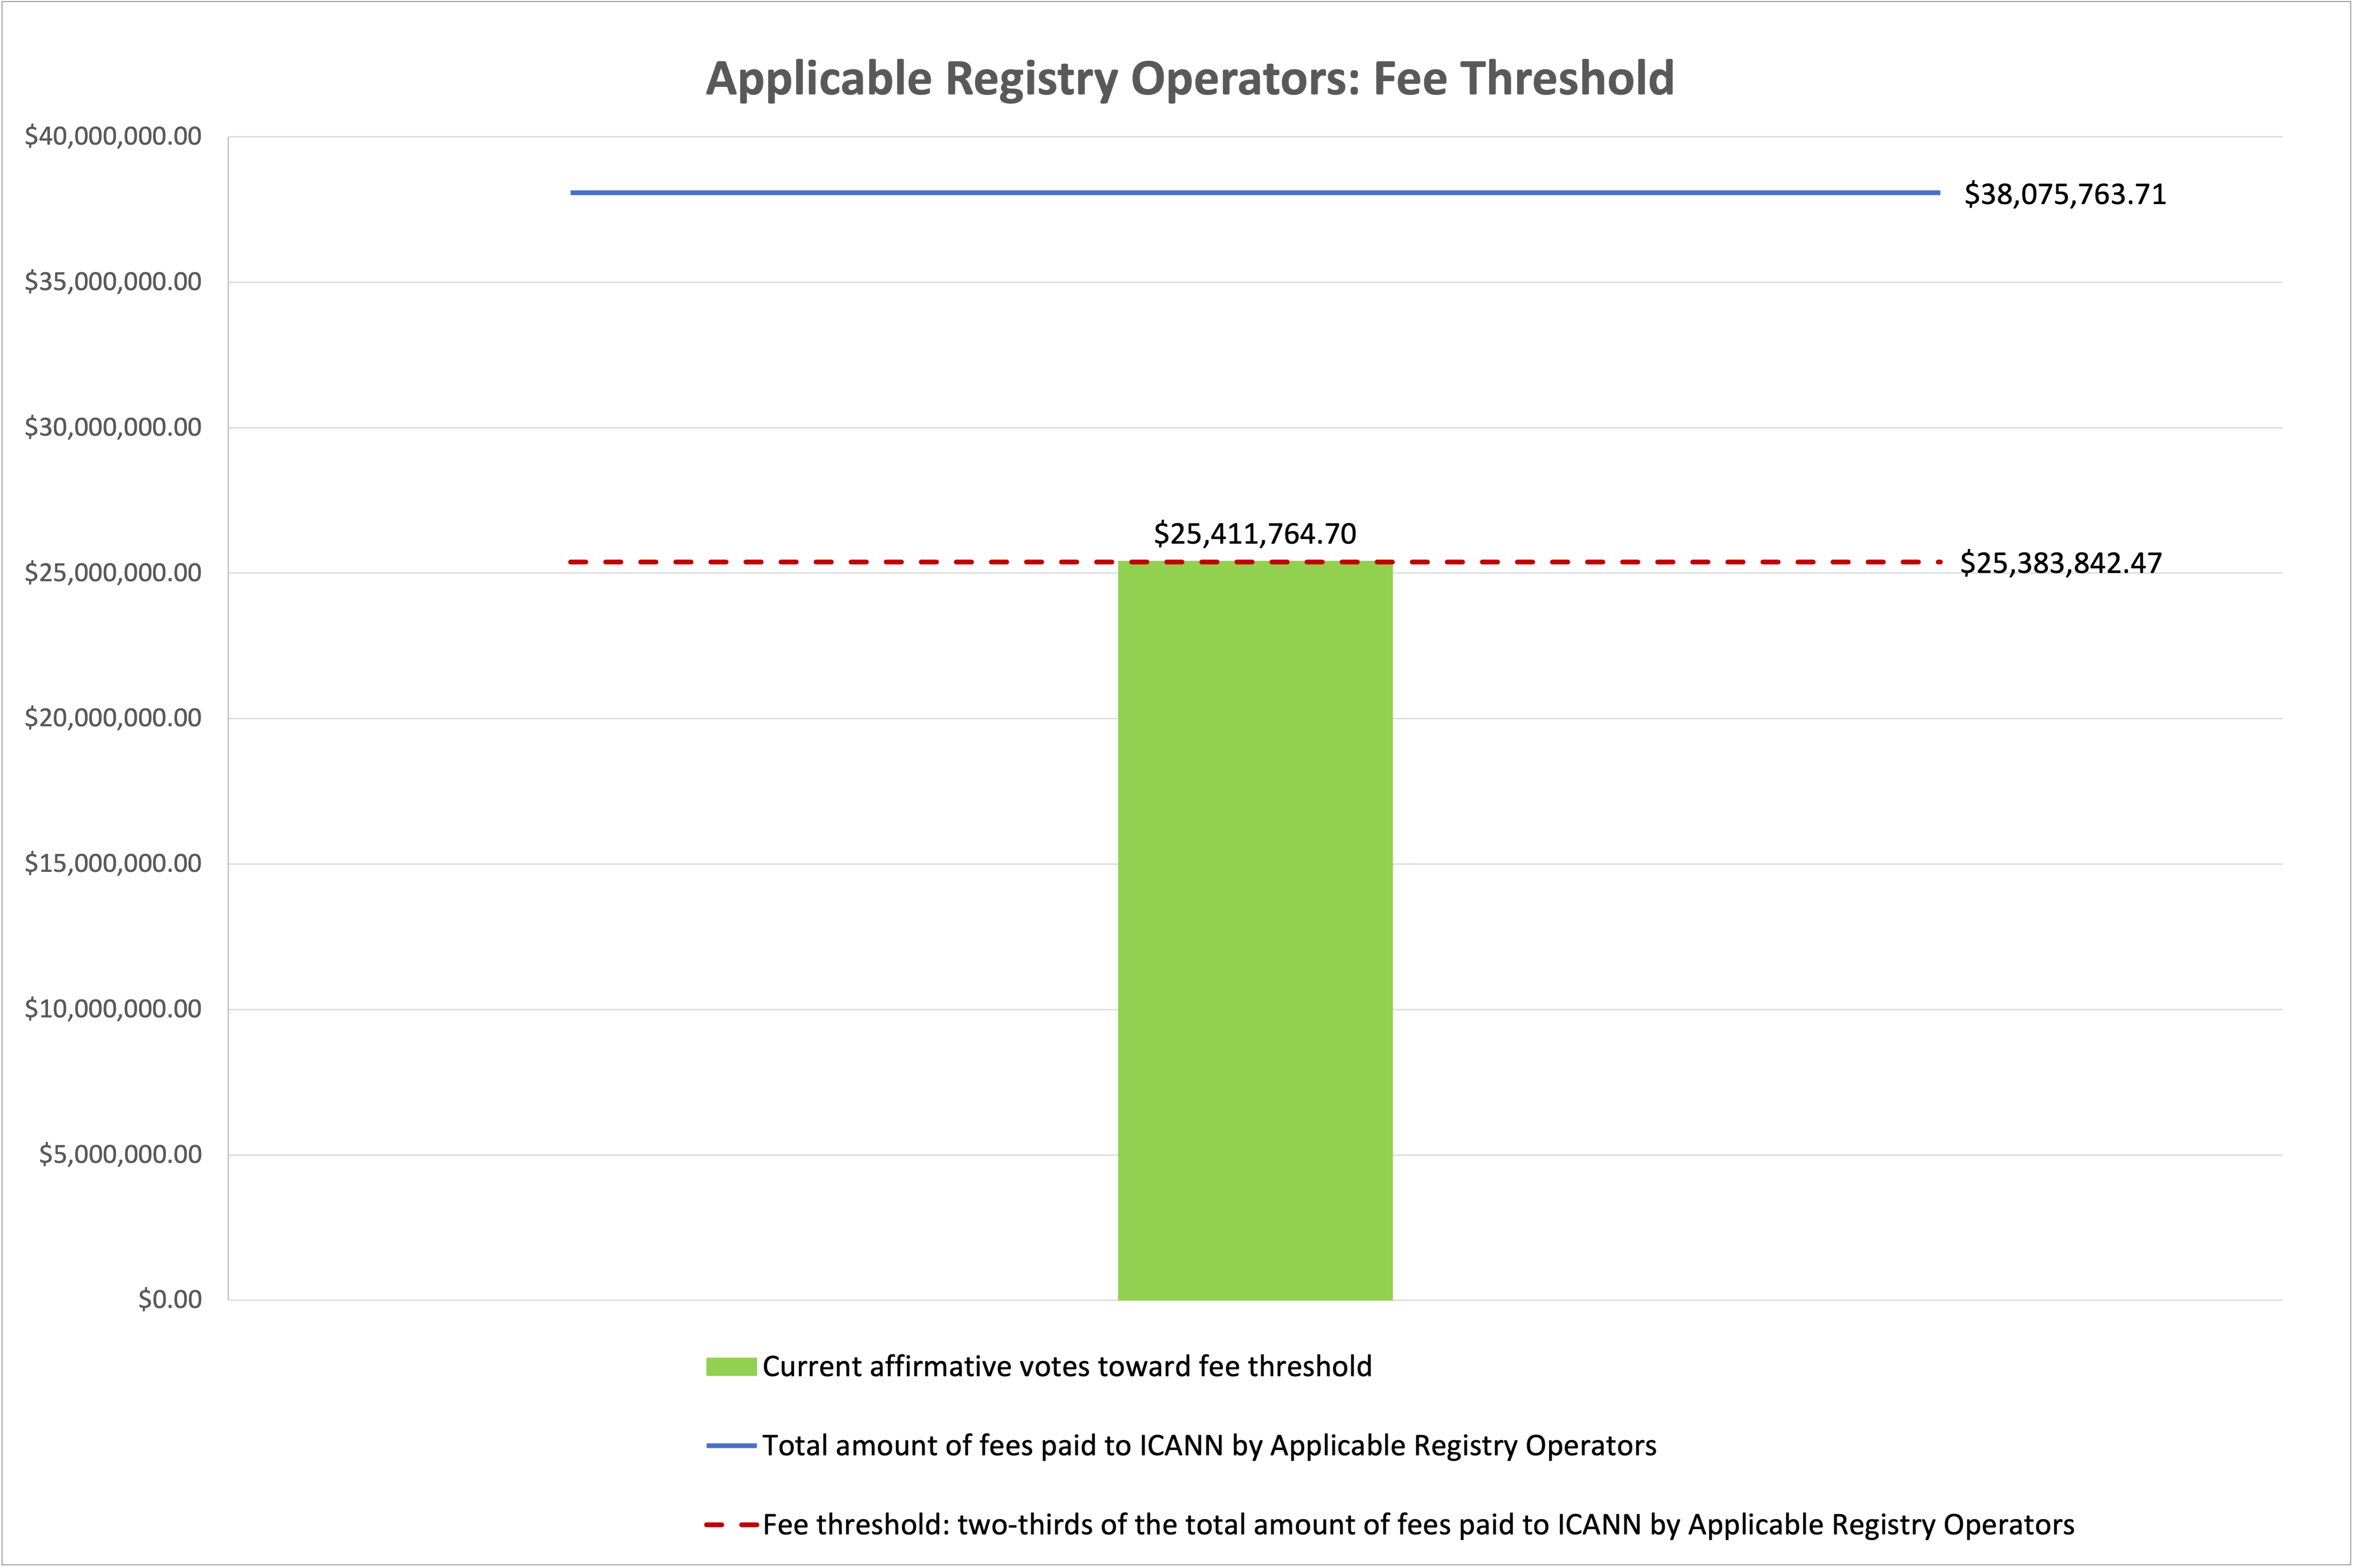 Bar chart of the progress of the vote towards meeting the fee threshold for Applicable Registry Operators. Fee approval threshold of $25,383,842.47 with current affirmative votes toward the fee threshold at $25,411,764.70